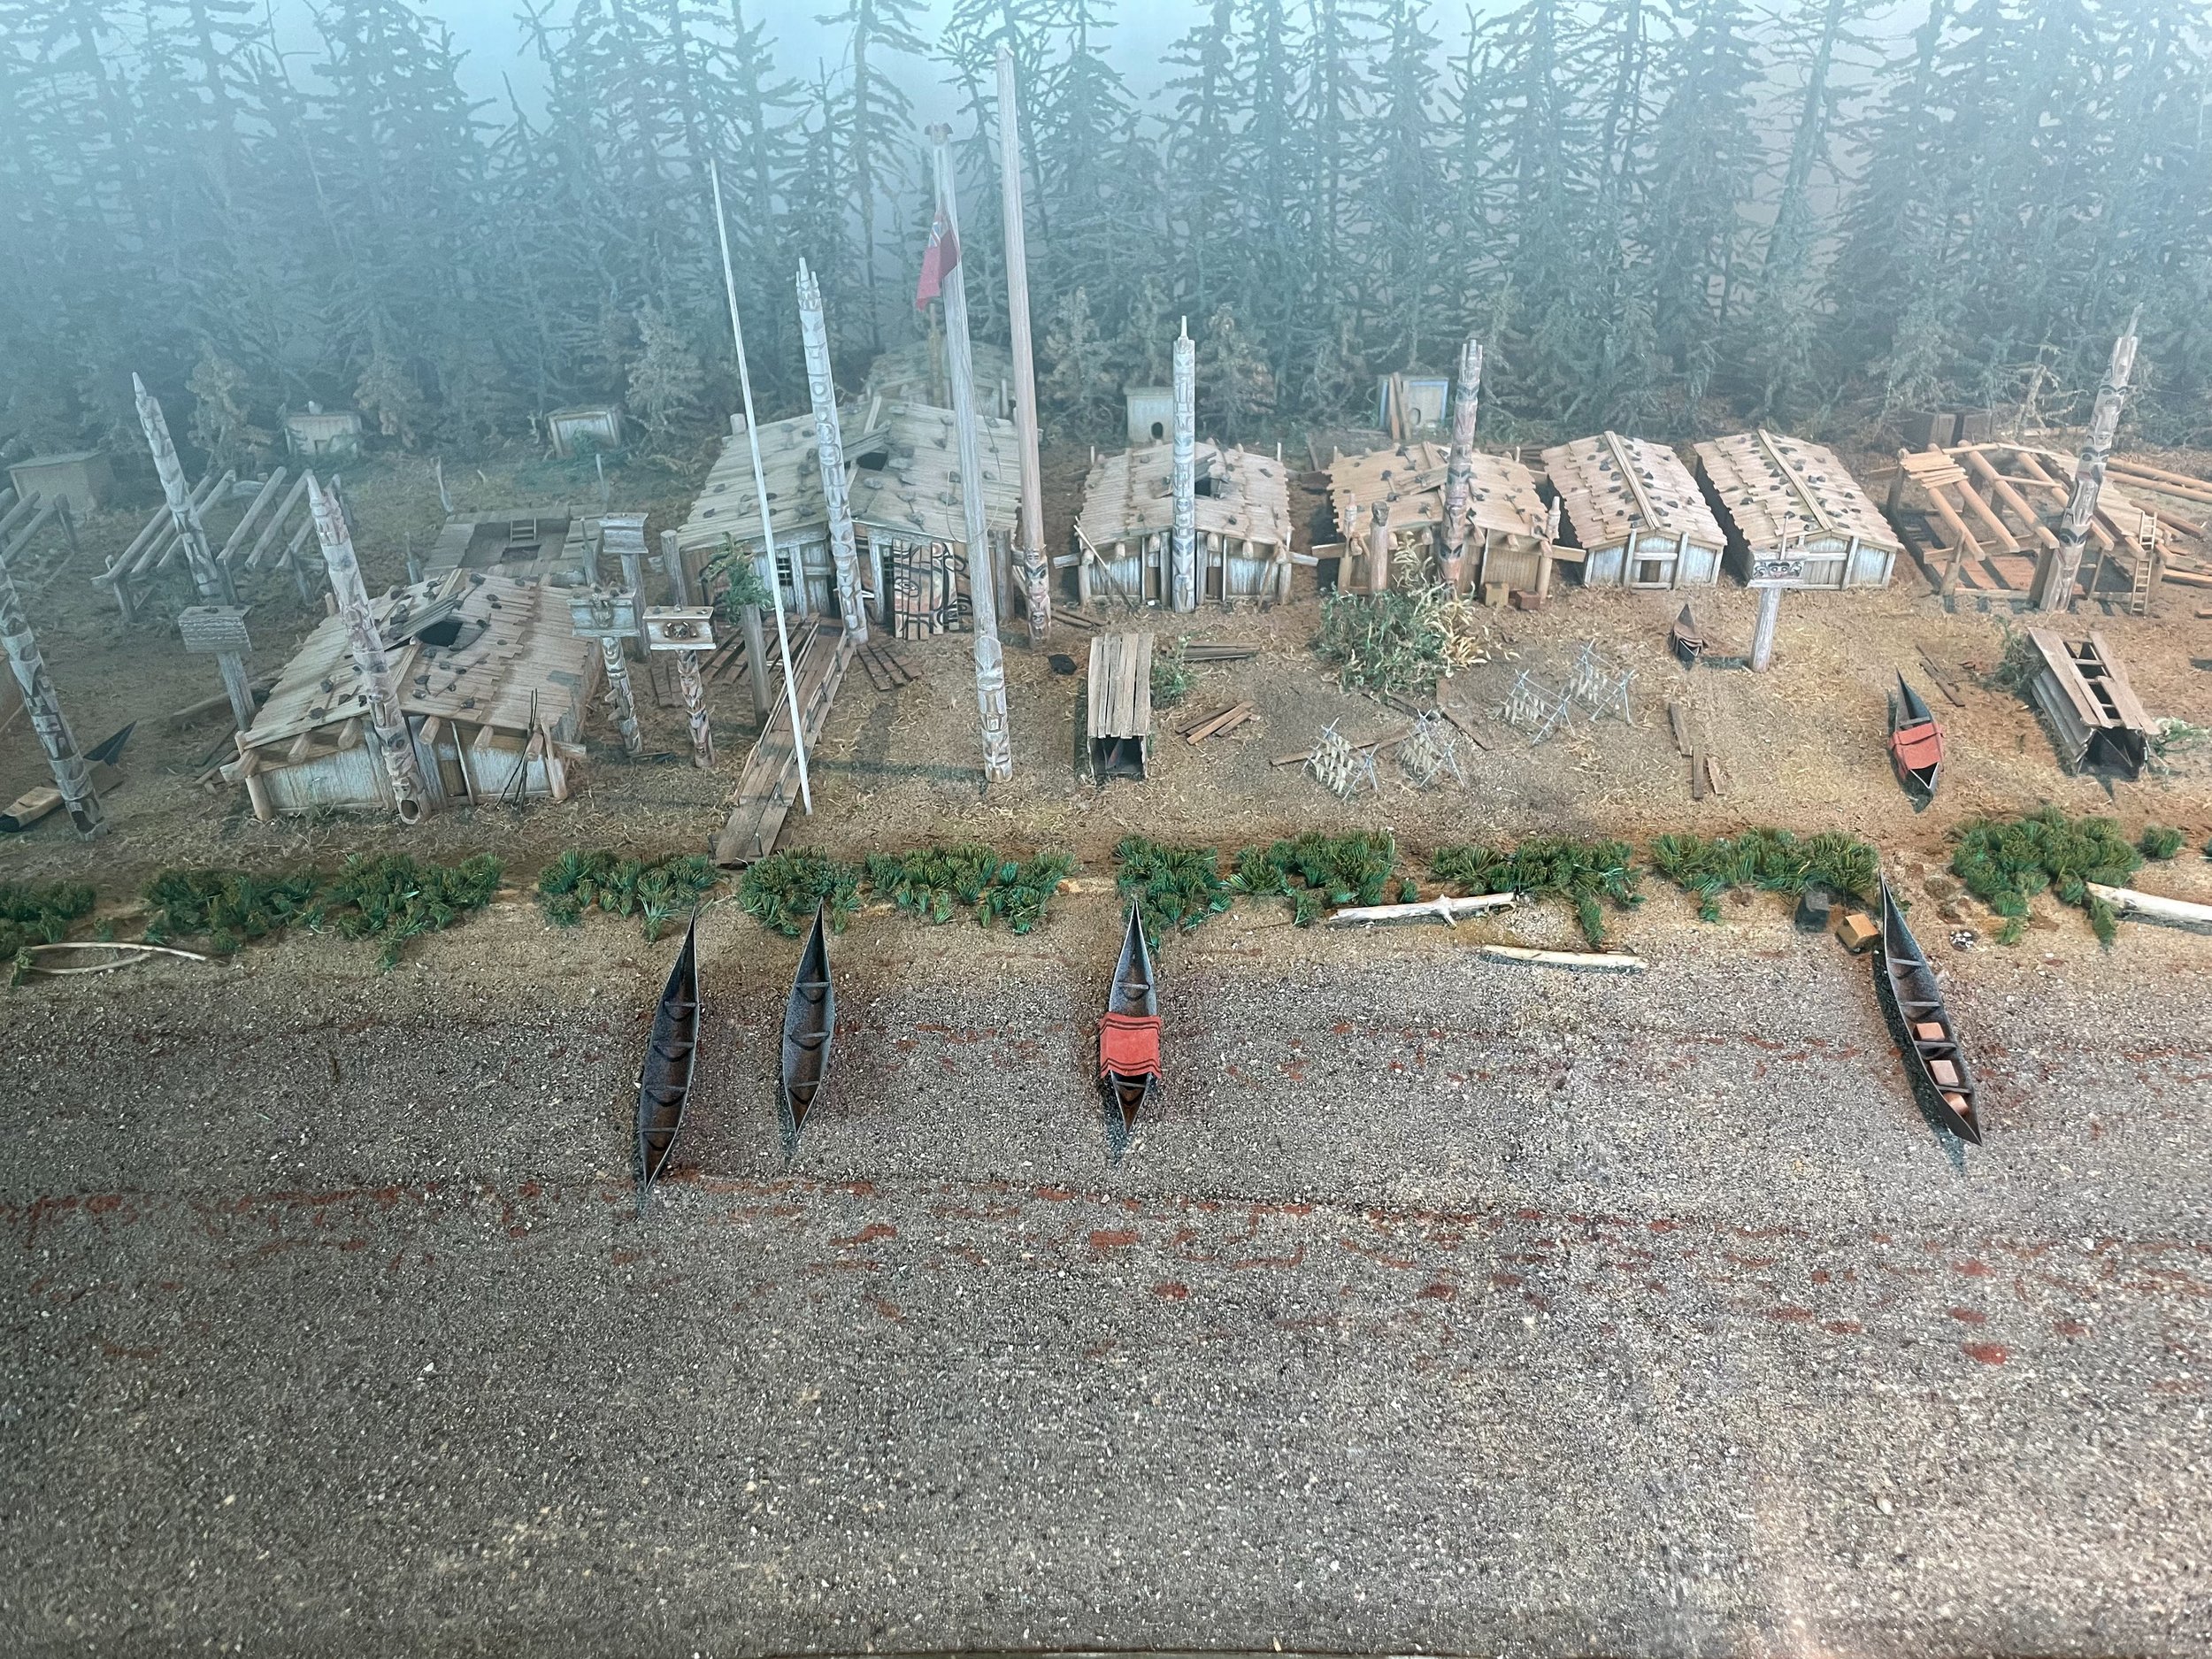  A model village of what Skidegate looked like pre-contact. 